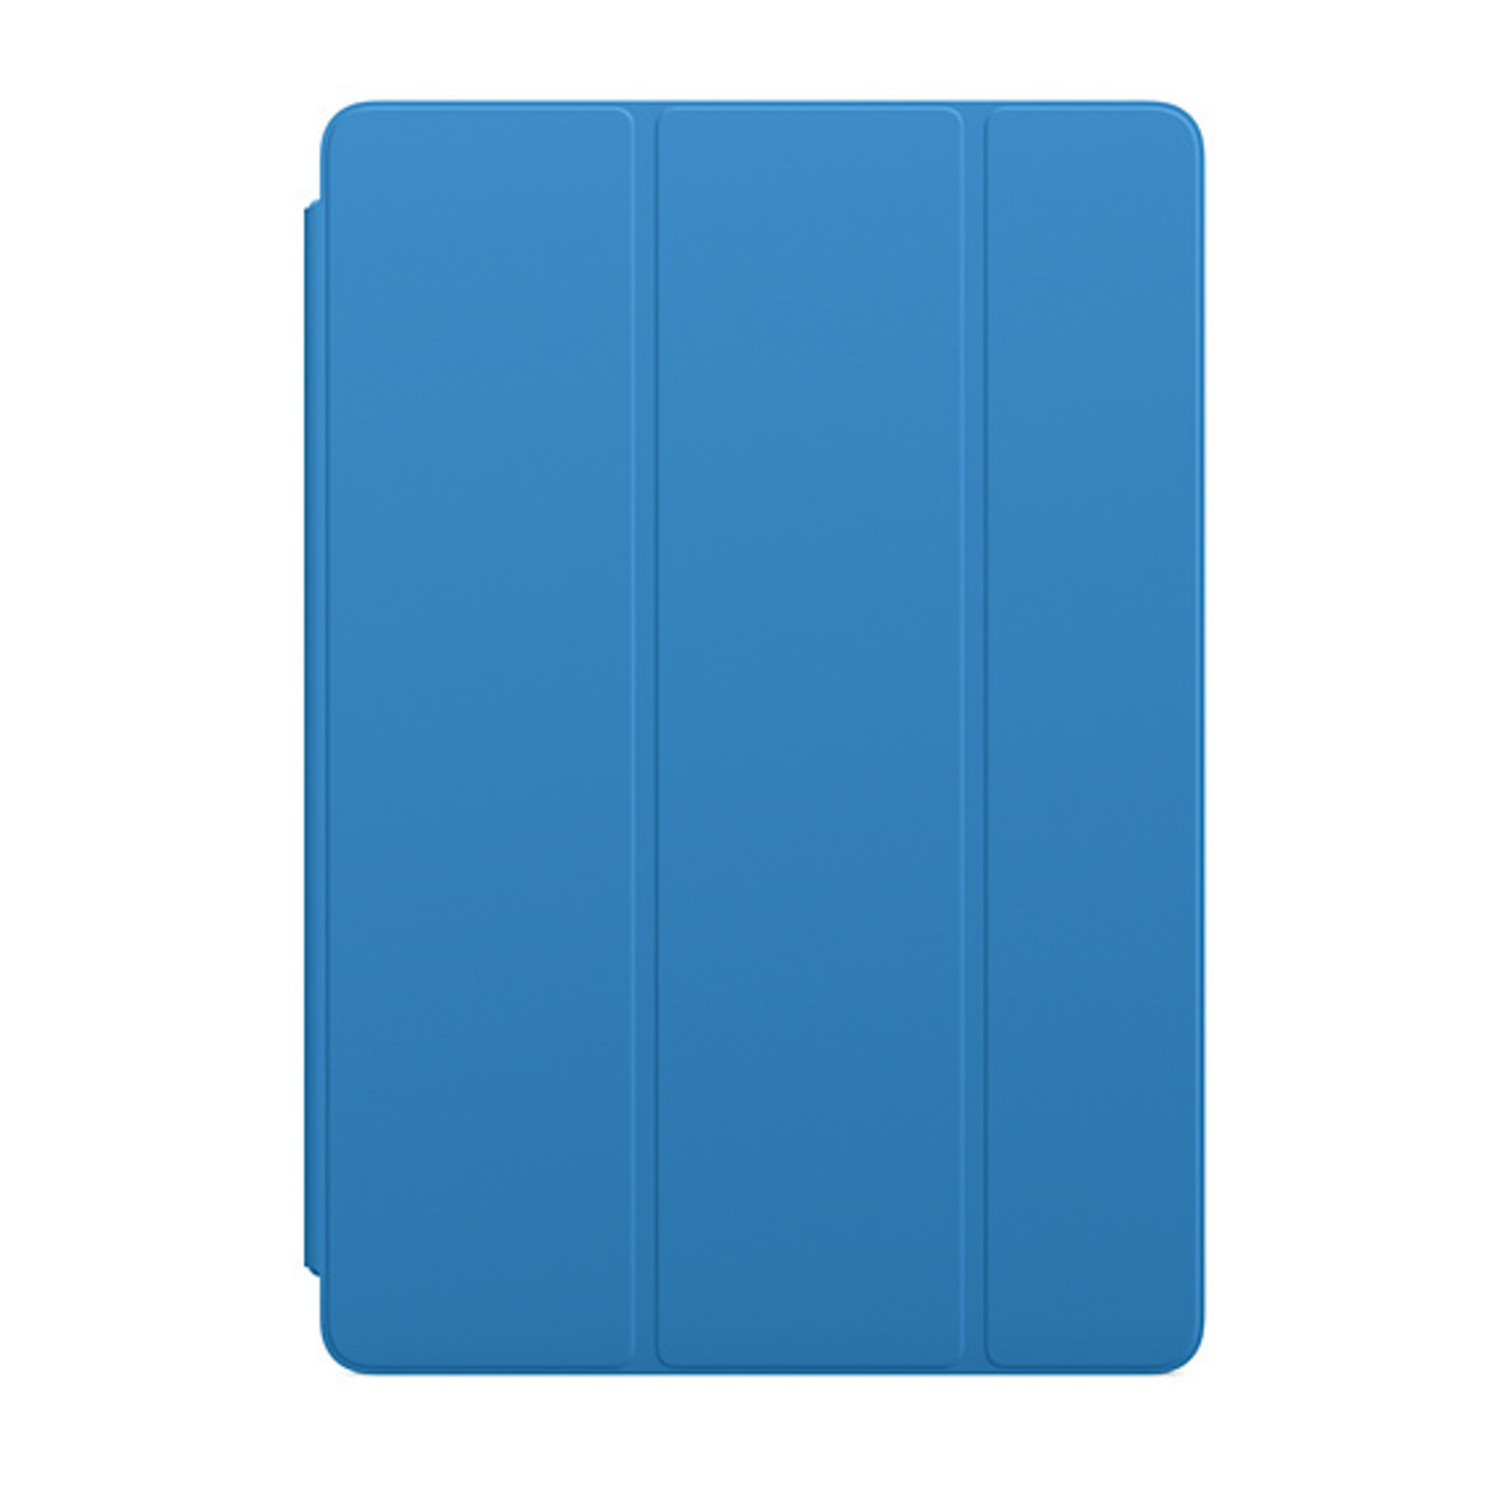 absurd sig selv Forstærke Smart Cover for iPad (7th generation) and iPad Air (3rd generation) -  kite+key, Rutgers Tech Store